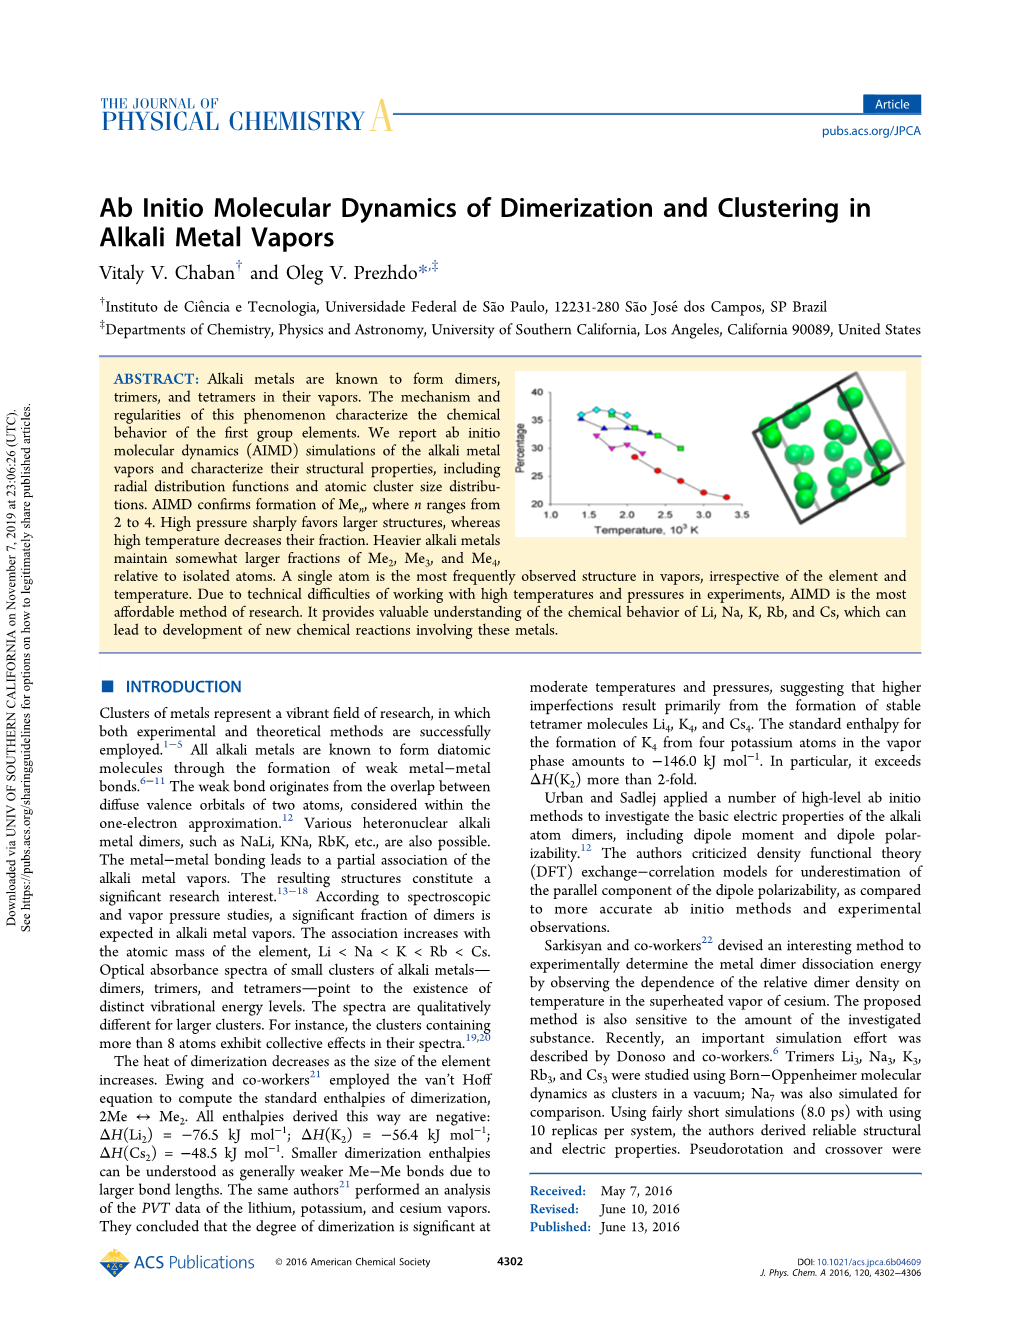 Ab Initio Molecular Dynamics of Dimerization and Clustering in Alkali Metal Vapors † ‡ Vitaly V